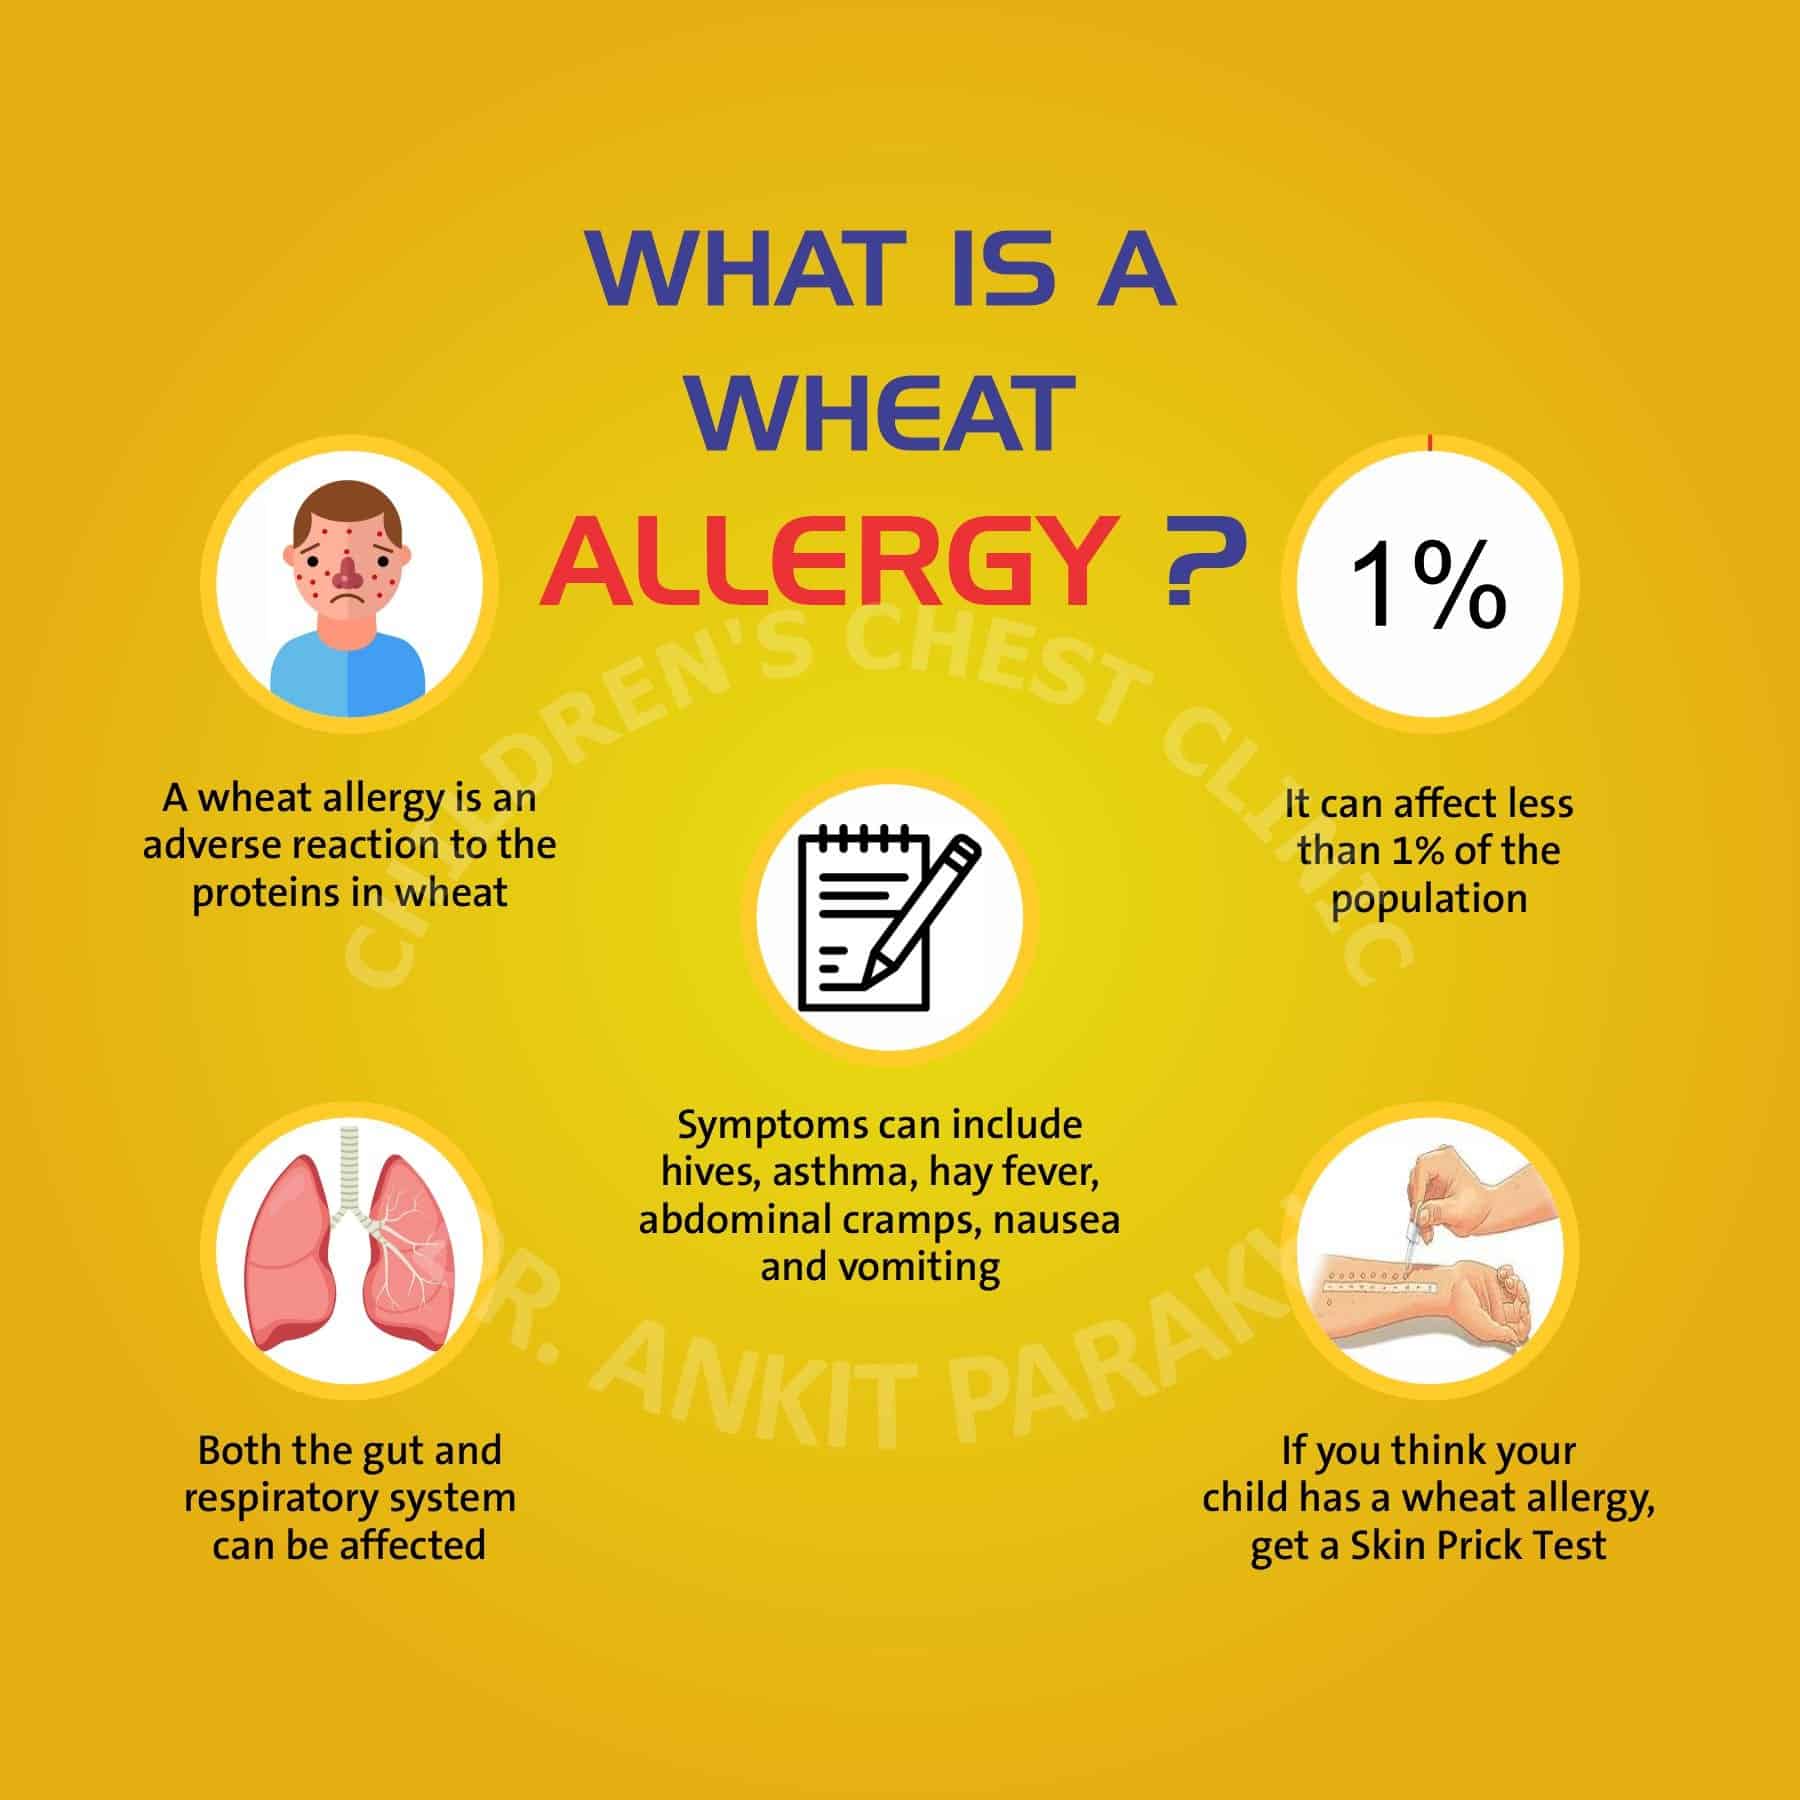 Wheat Allergy: Symptoms, diagnosis and management?